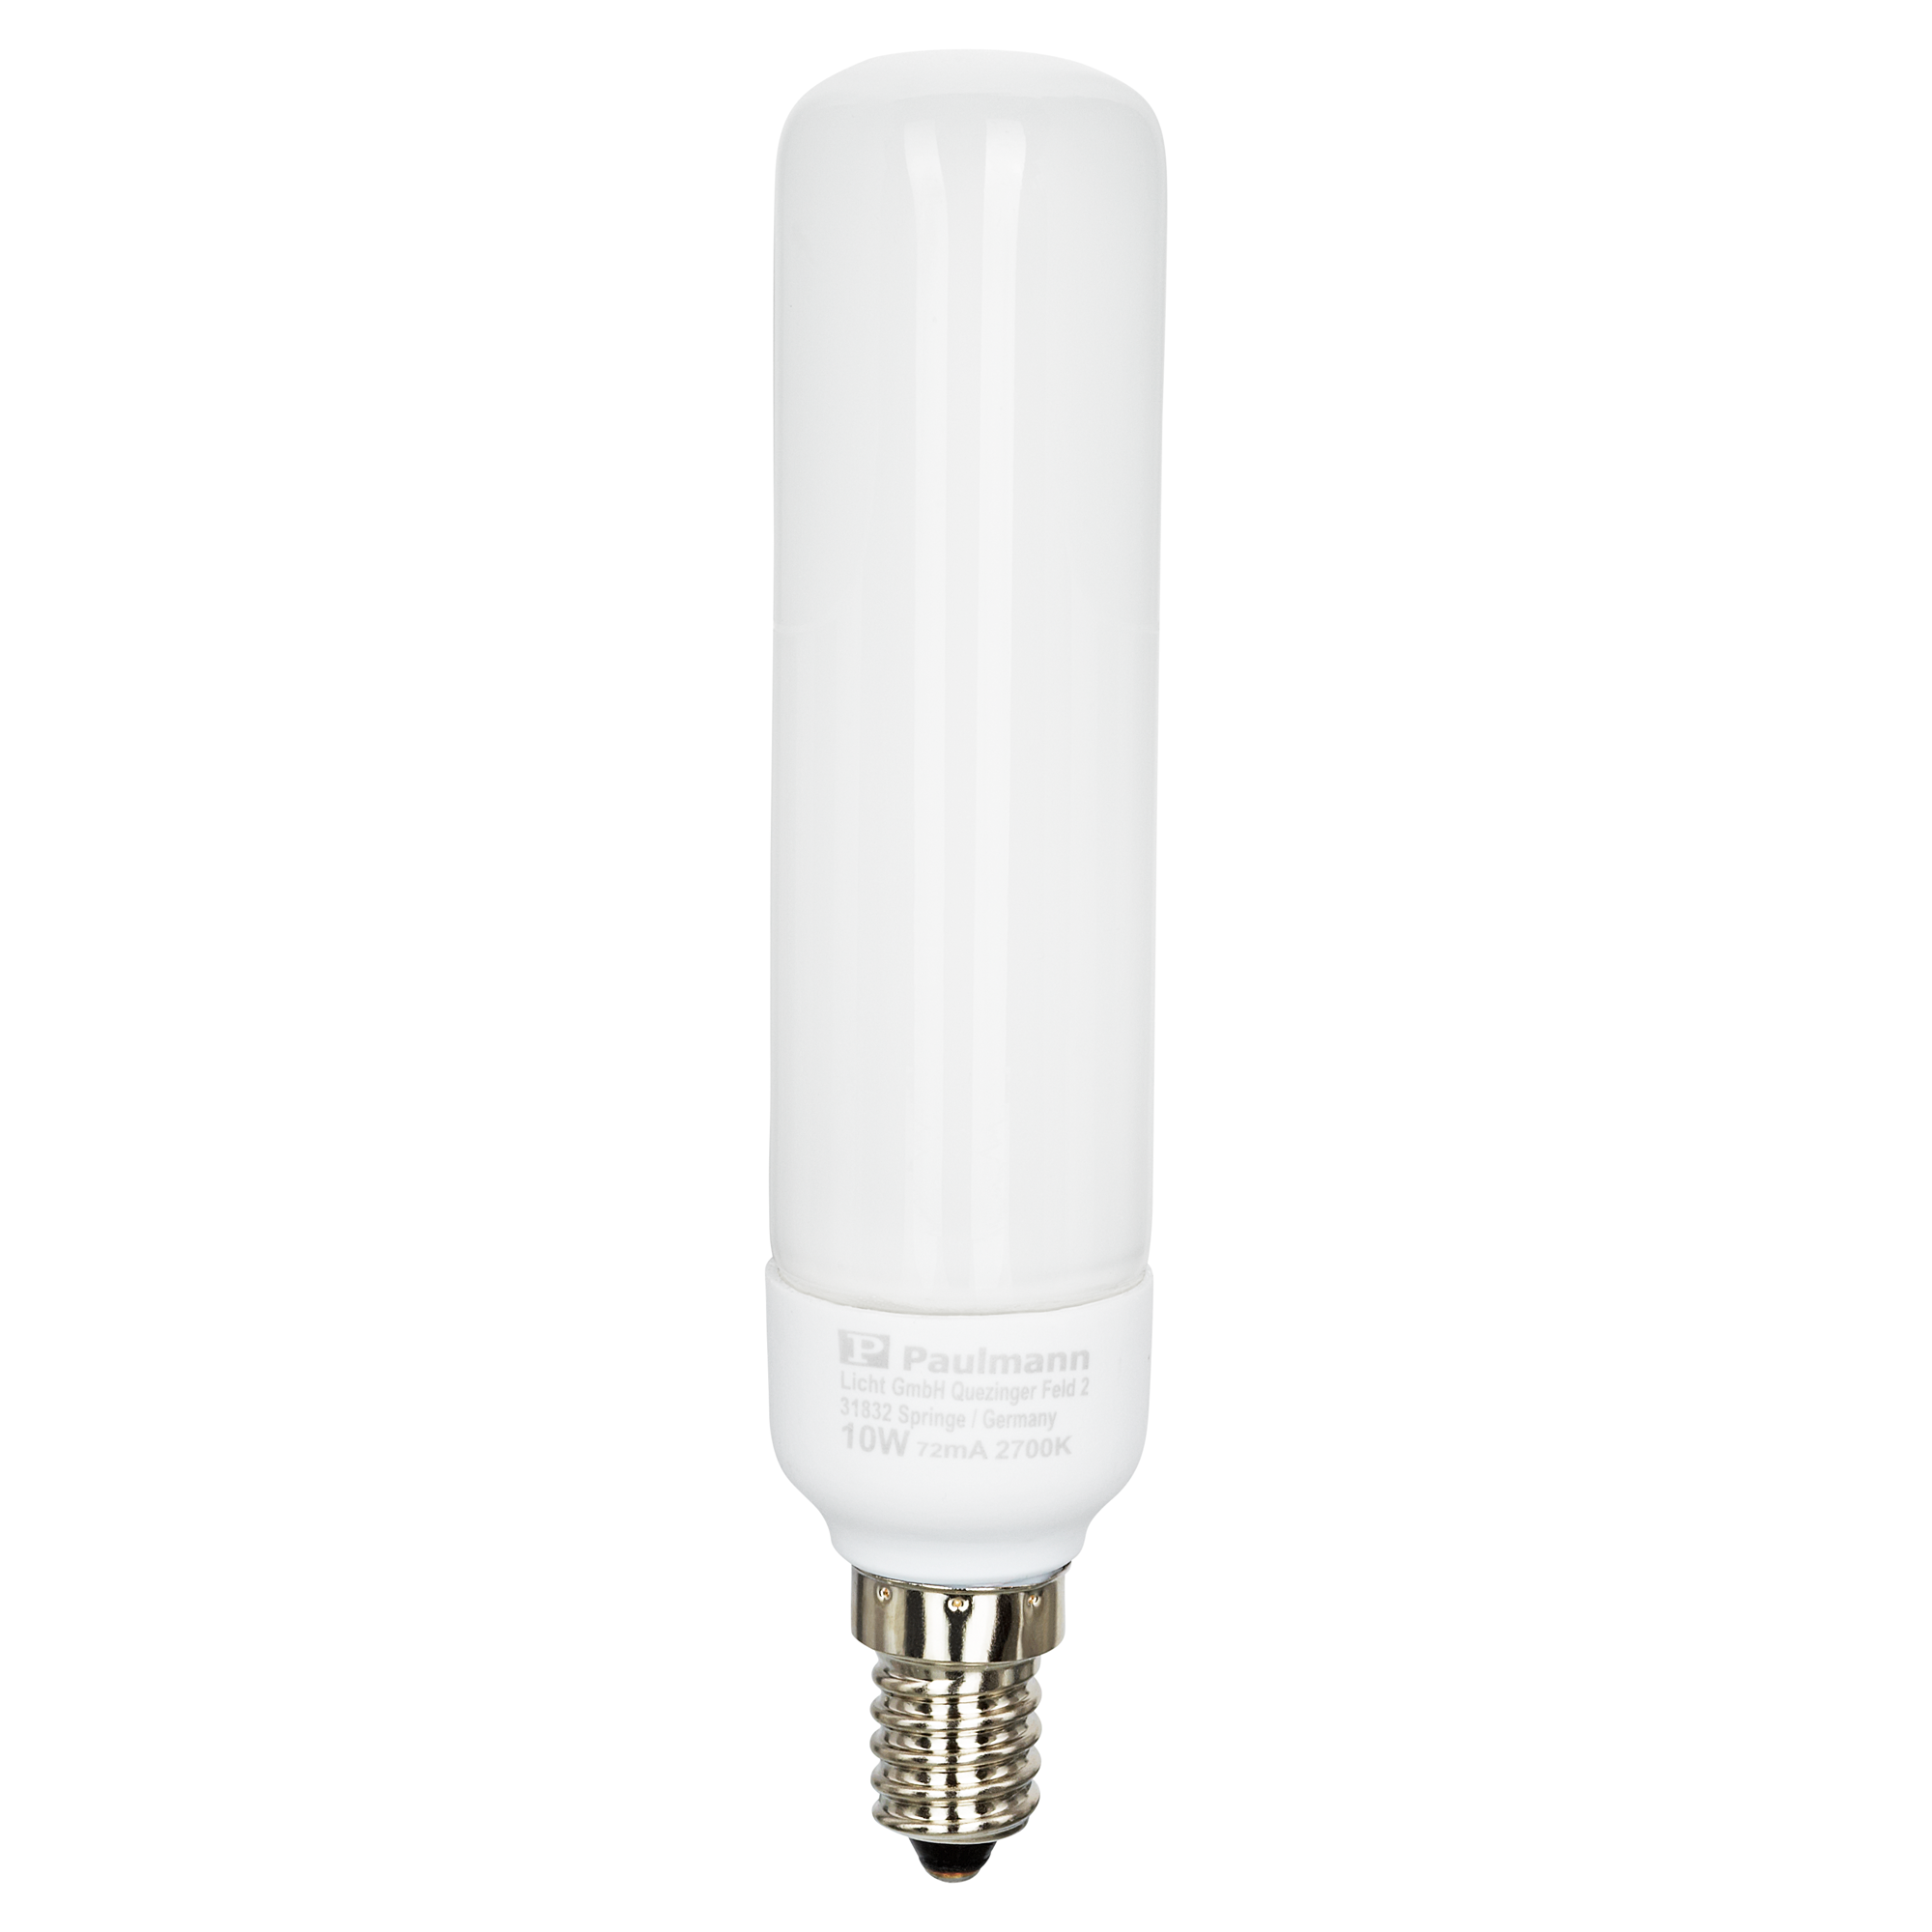 Energiesparlampe 'Röhre' E14 warmweiß 10 W + product picture